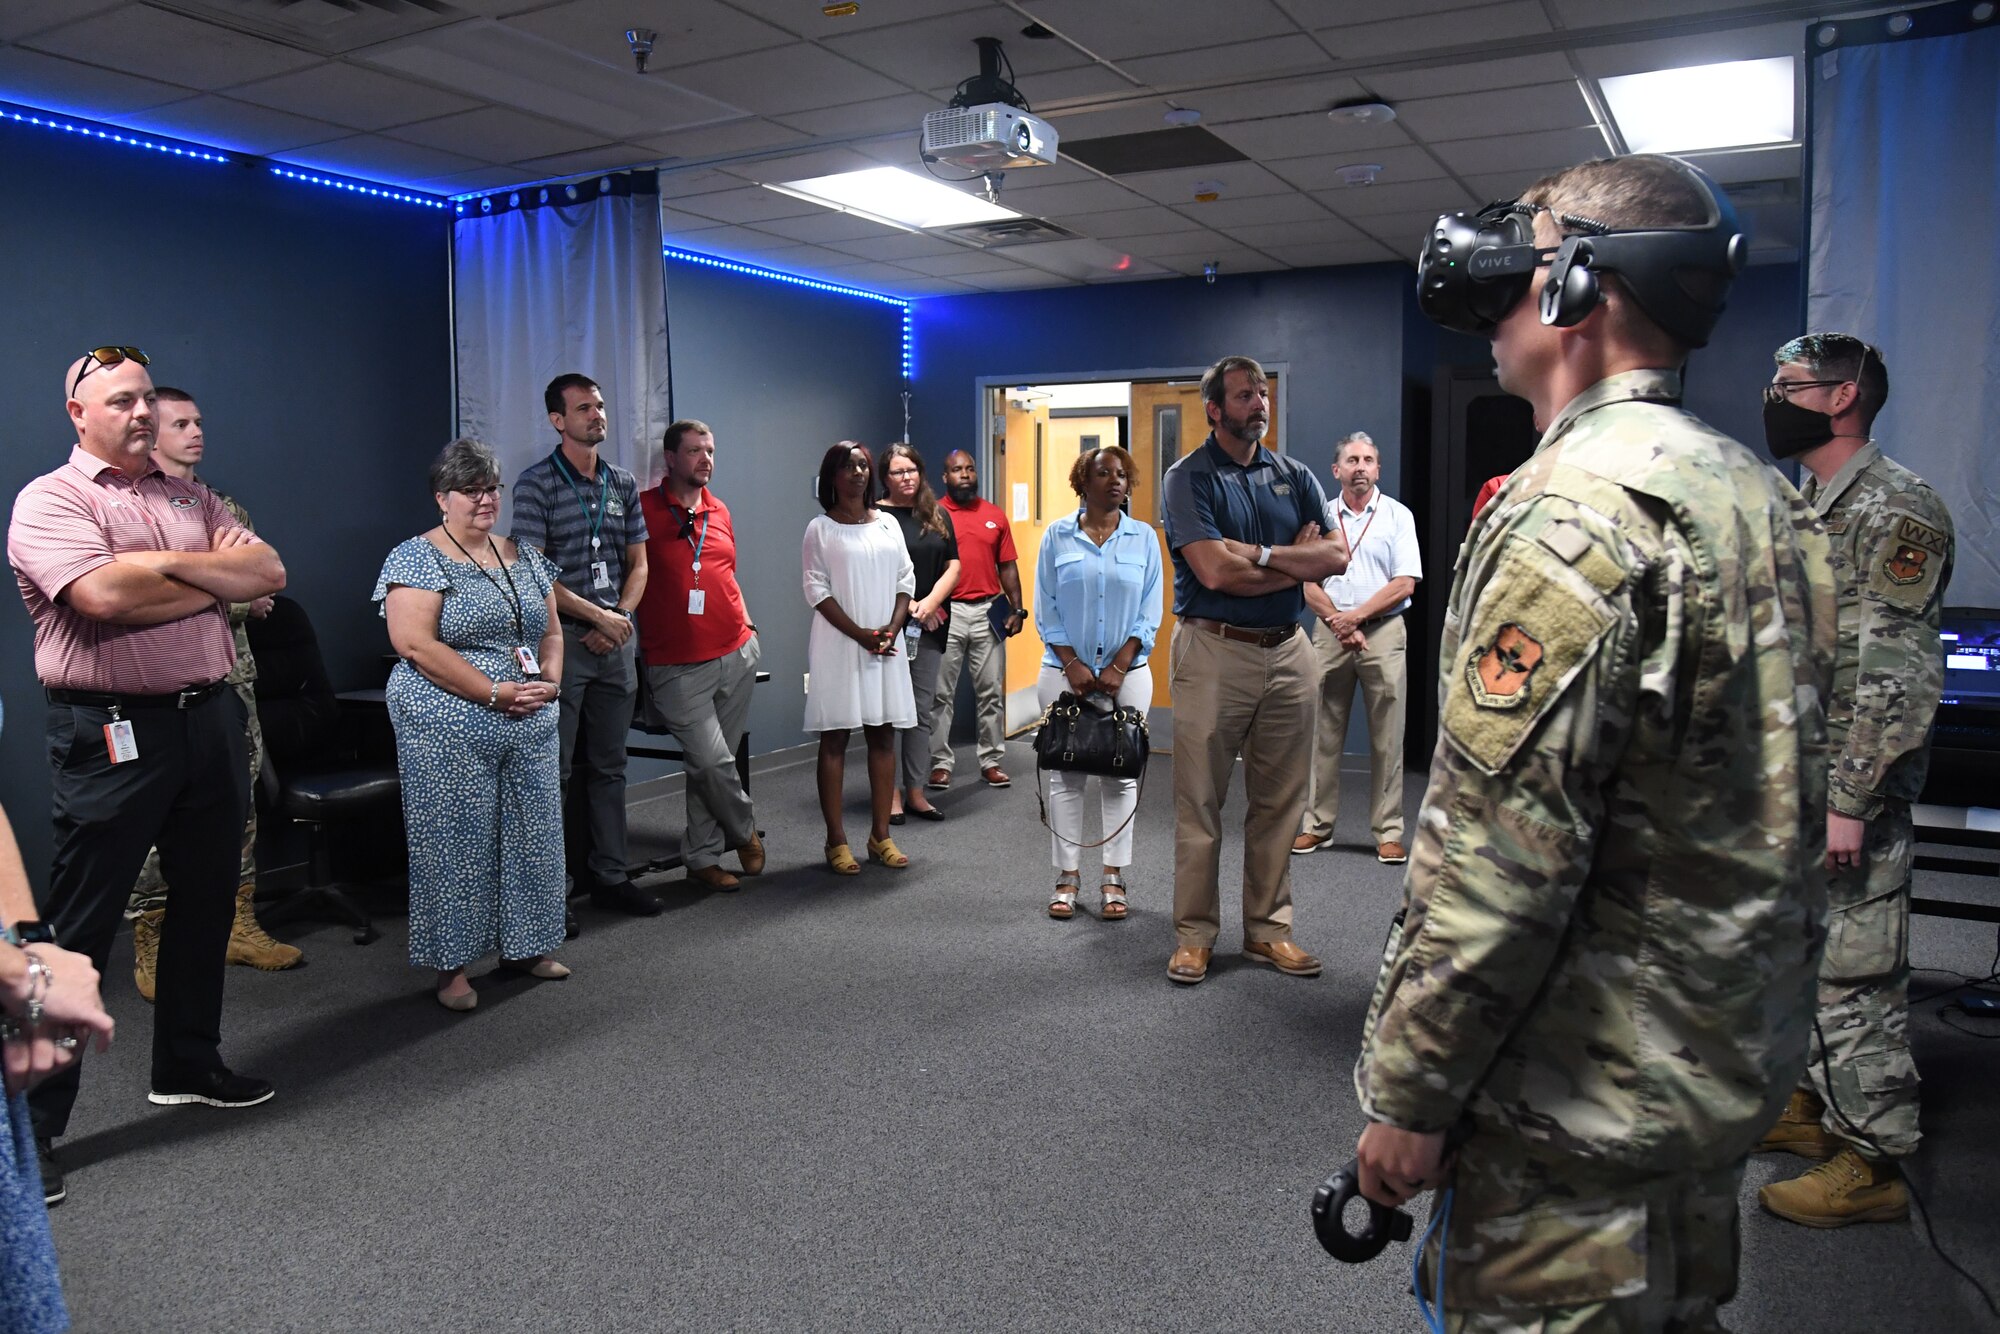 Members of the Biloxi and Jackson County School Districts administration receive a 335th Training Squadron weather training course virtual reality demonstration inside the weather training facility at Keesler Air Force Base, Mississippi, July 7, 2022. The visit also included a tour of the student dorms and the air traffic control training course. (U.S. Air Force photo by Kemberly Groue)